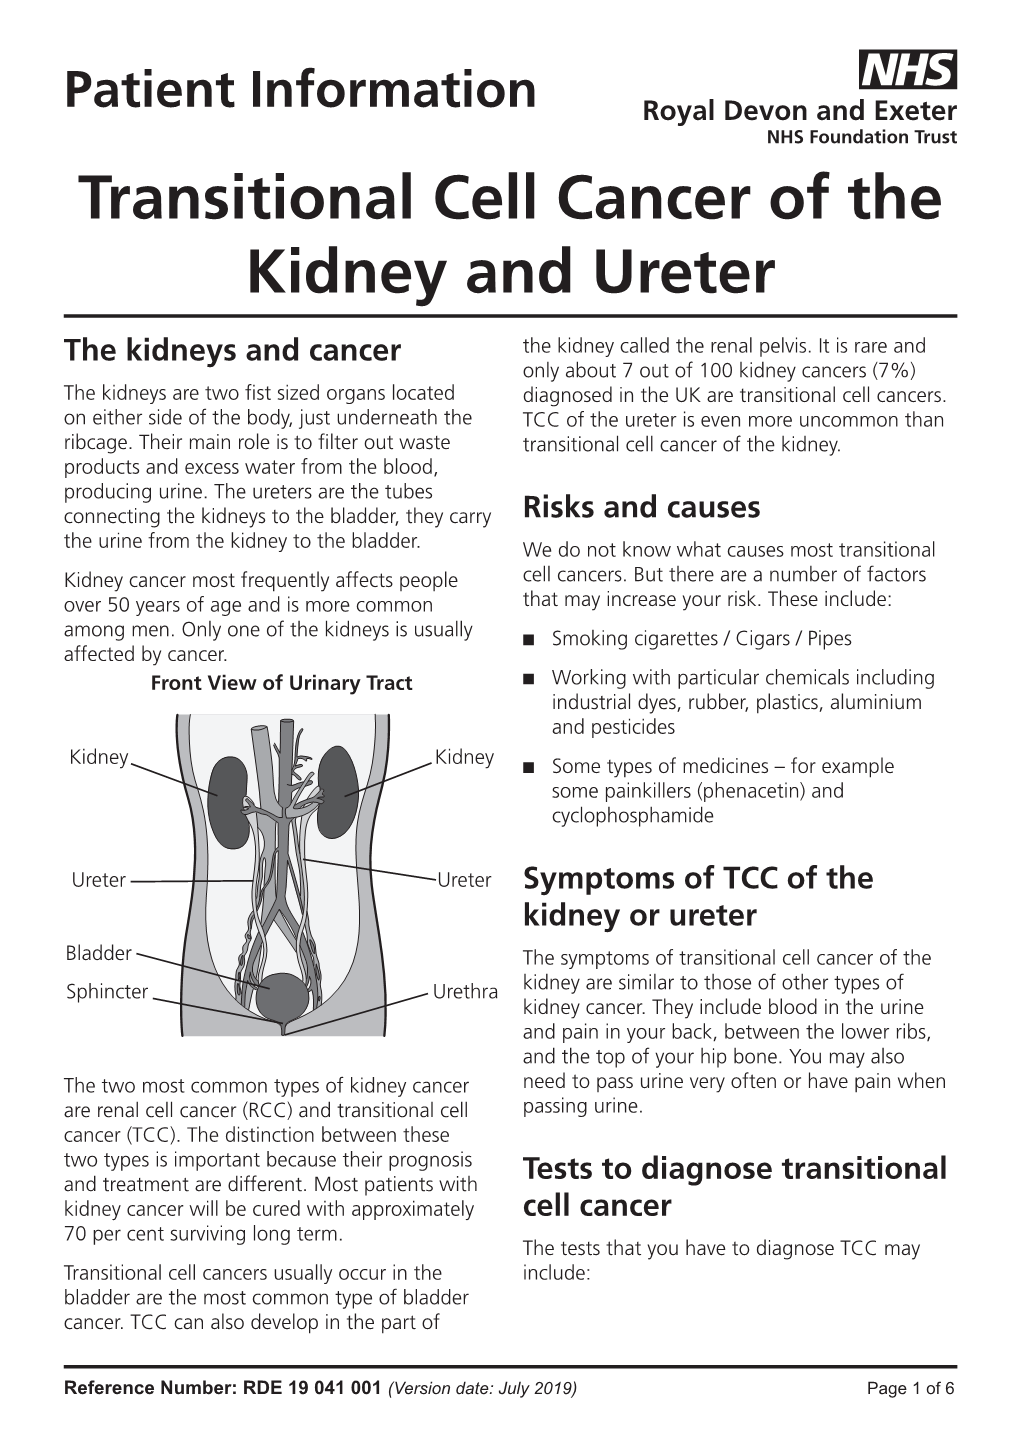 Transitional Cell Cancer of the Kidney and Ureter the Kidneys and Cancer the Kidney Called the Renal Pelvis